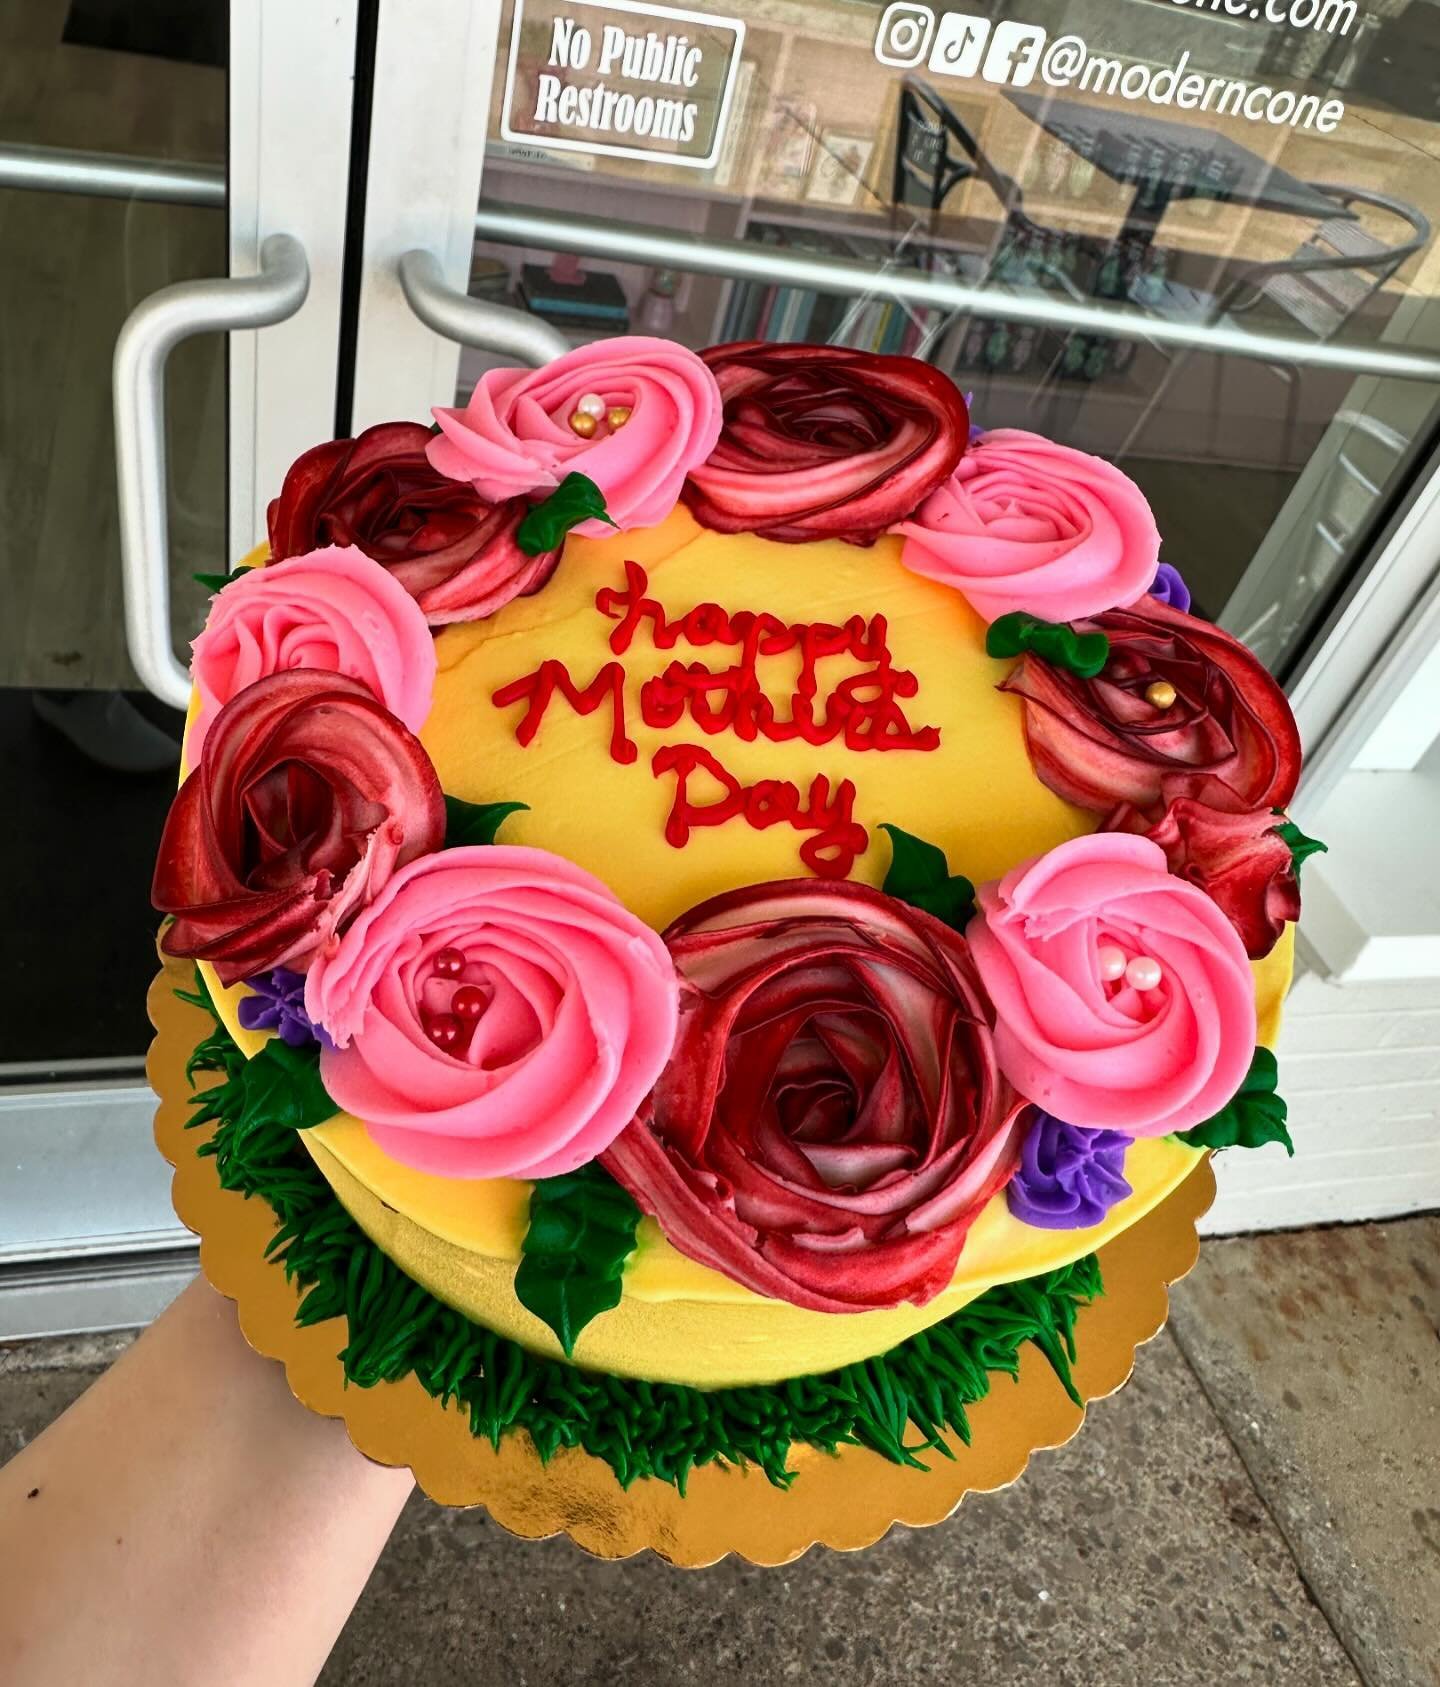 Now is the time to place your mother&rsquo;s days ice cream cake! If you don&rsquo;t want to place a custom order our freezer will be stocked with pre made ice cream cakes! 🎂 🍦
📍@moderncone

@stay_linked will be at our store on Mother&rsquo;s Day 